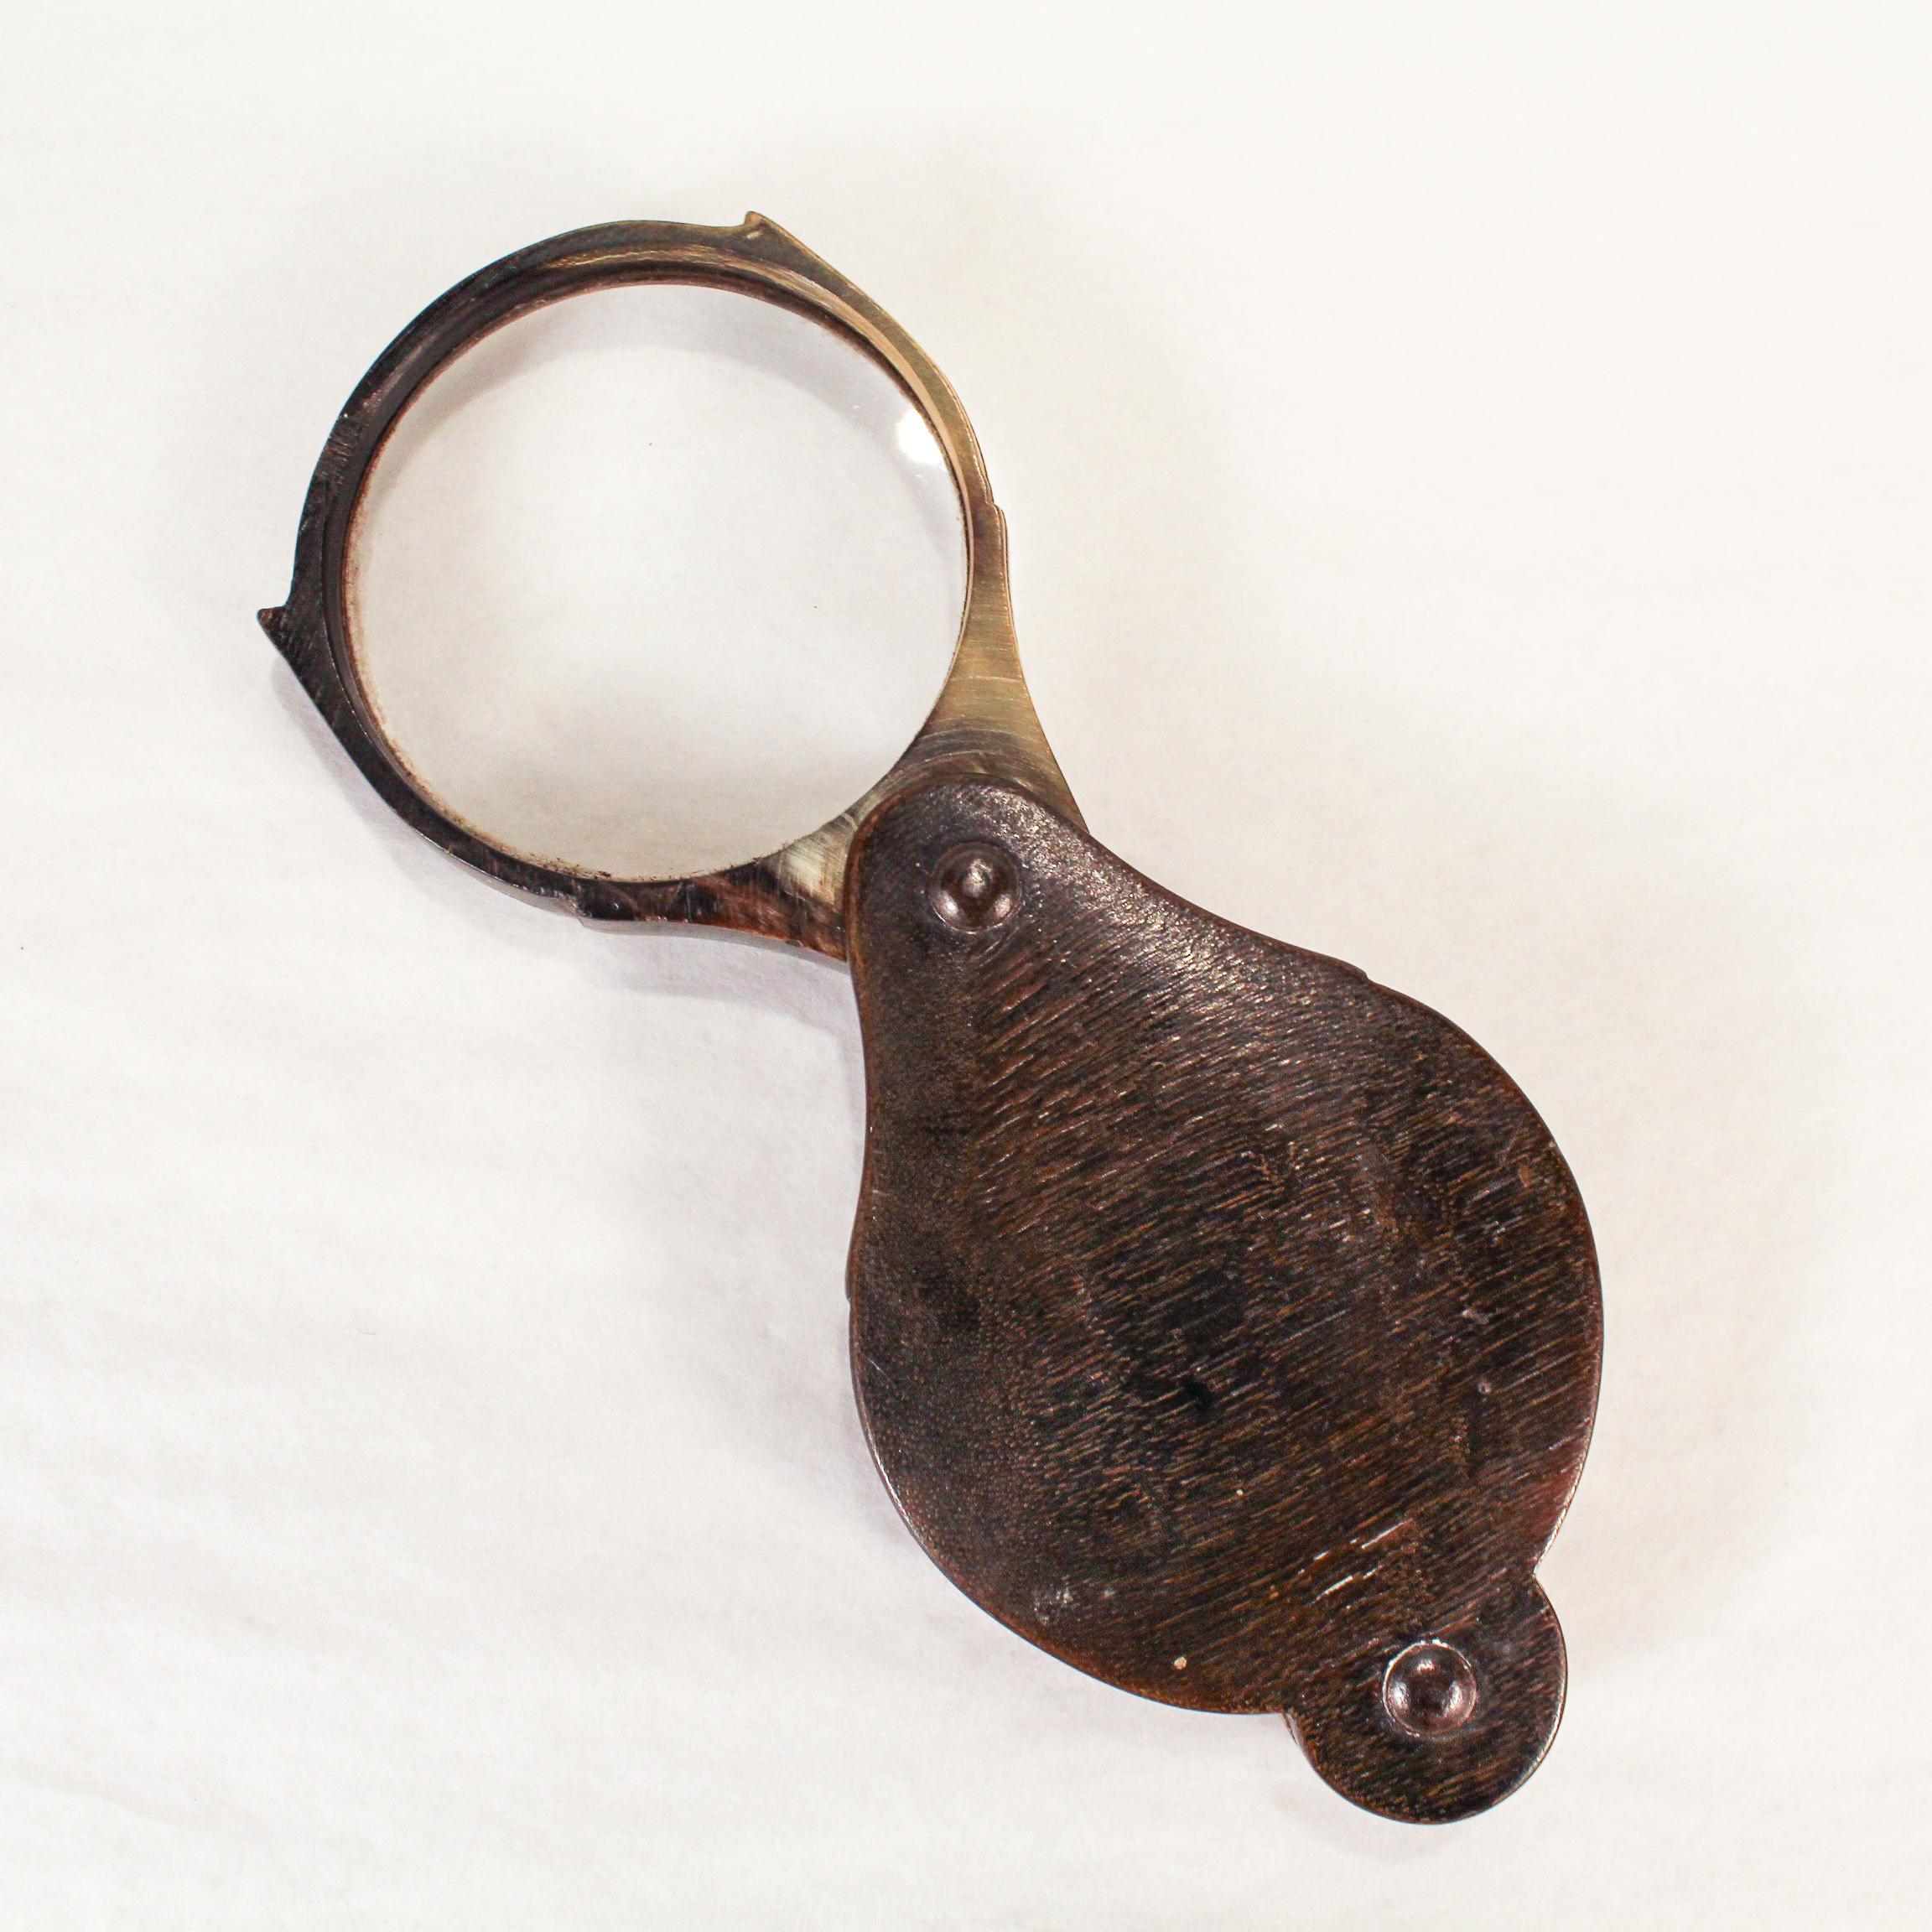 A fine antique magnifying glass or loupe.

The frame comprised of horn (likely from a steer or ram).

The magnifying glass is be rotated in and out of the cover protecting the lens while not in use.

Simply a great antique